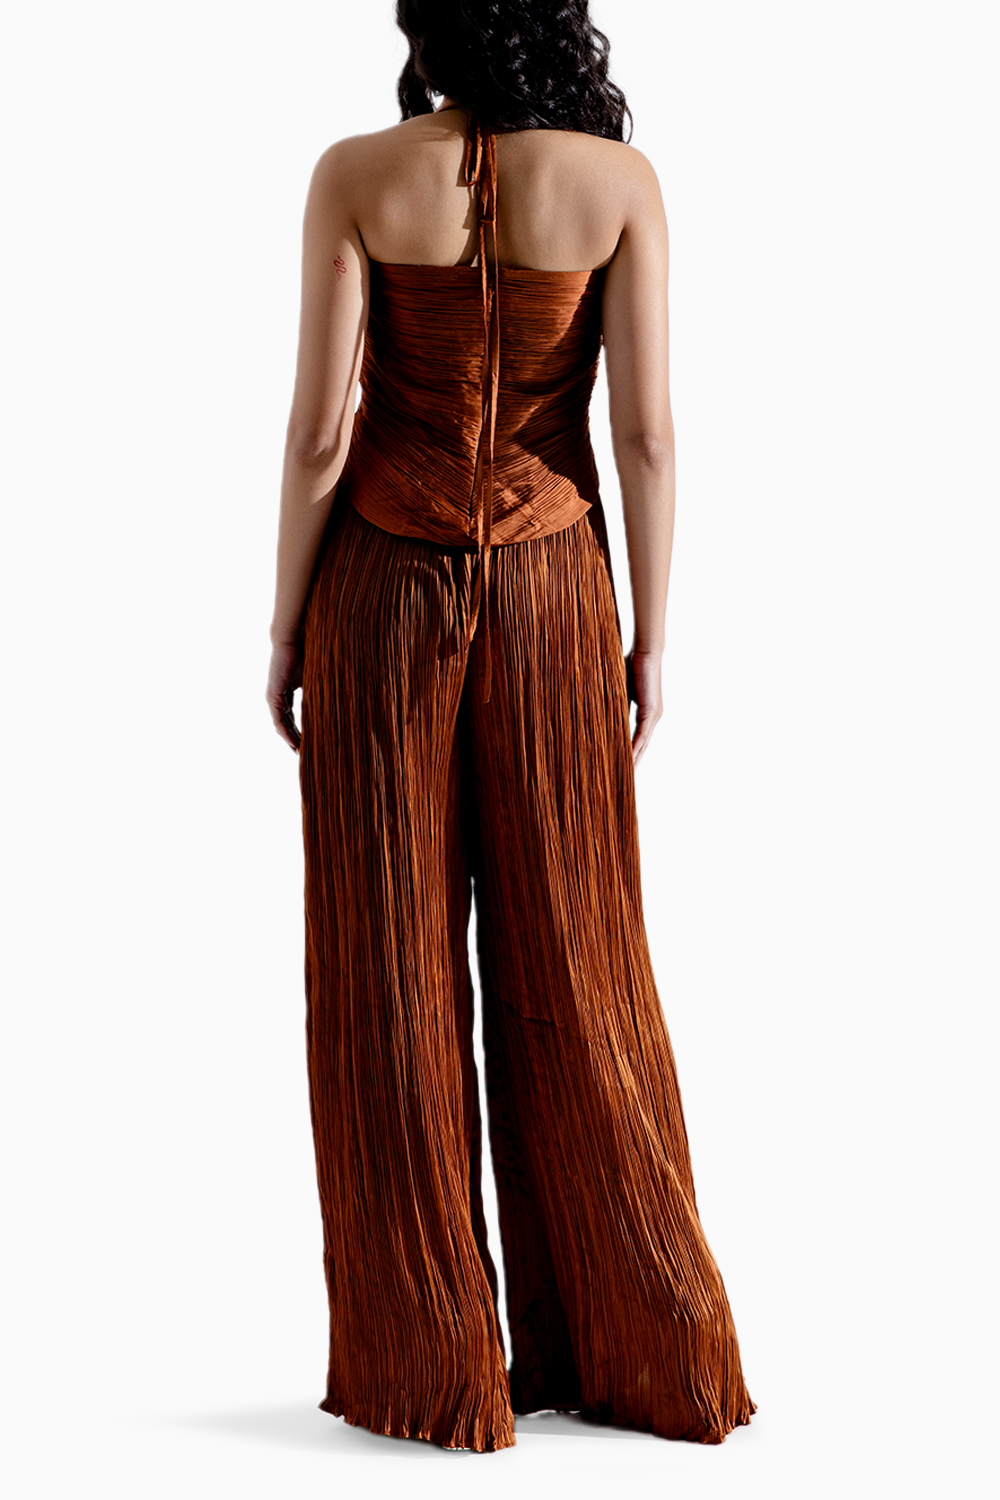 Toffee Ruched Crop Top and Pants